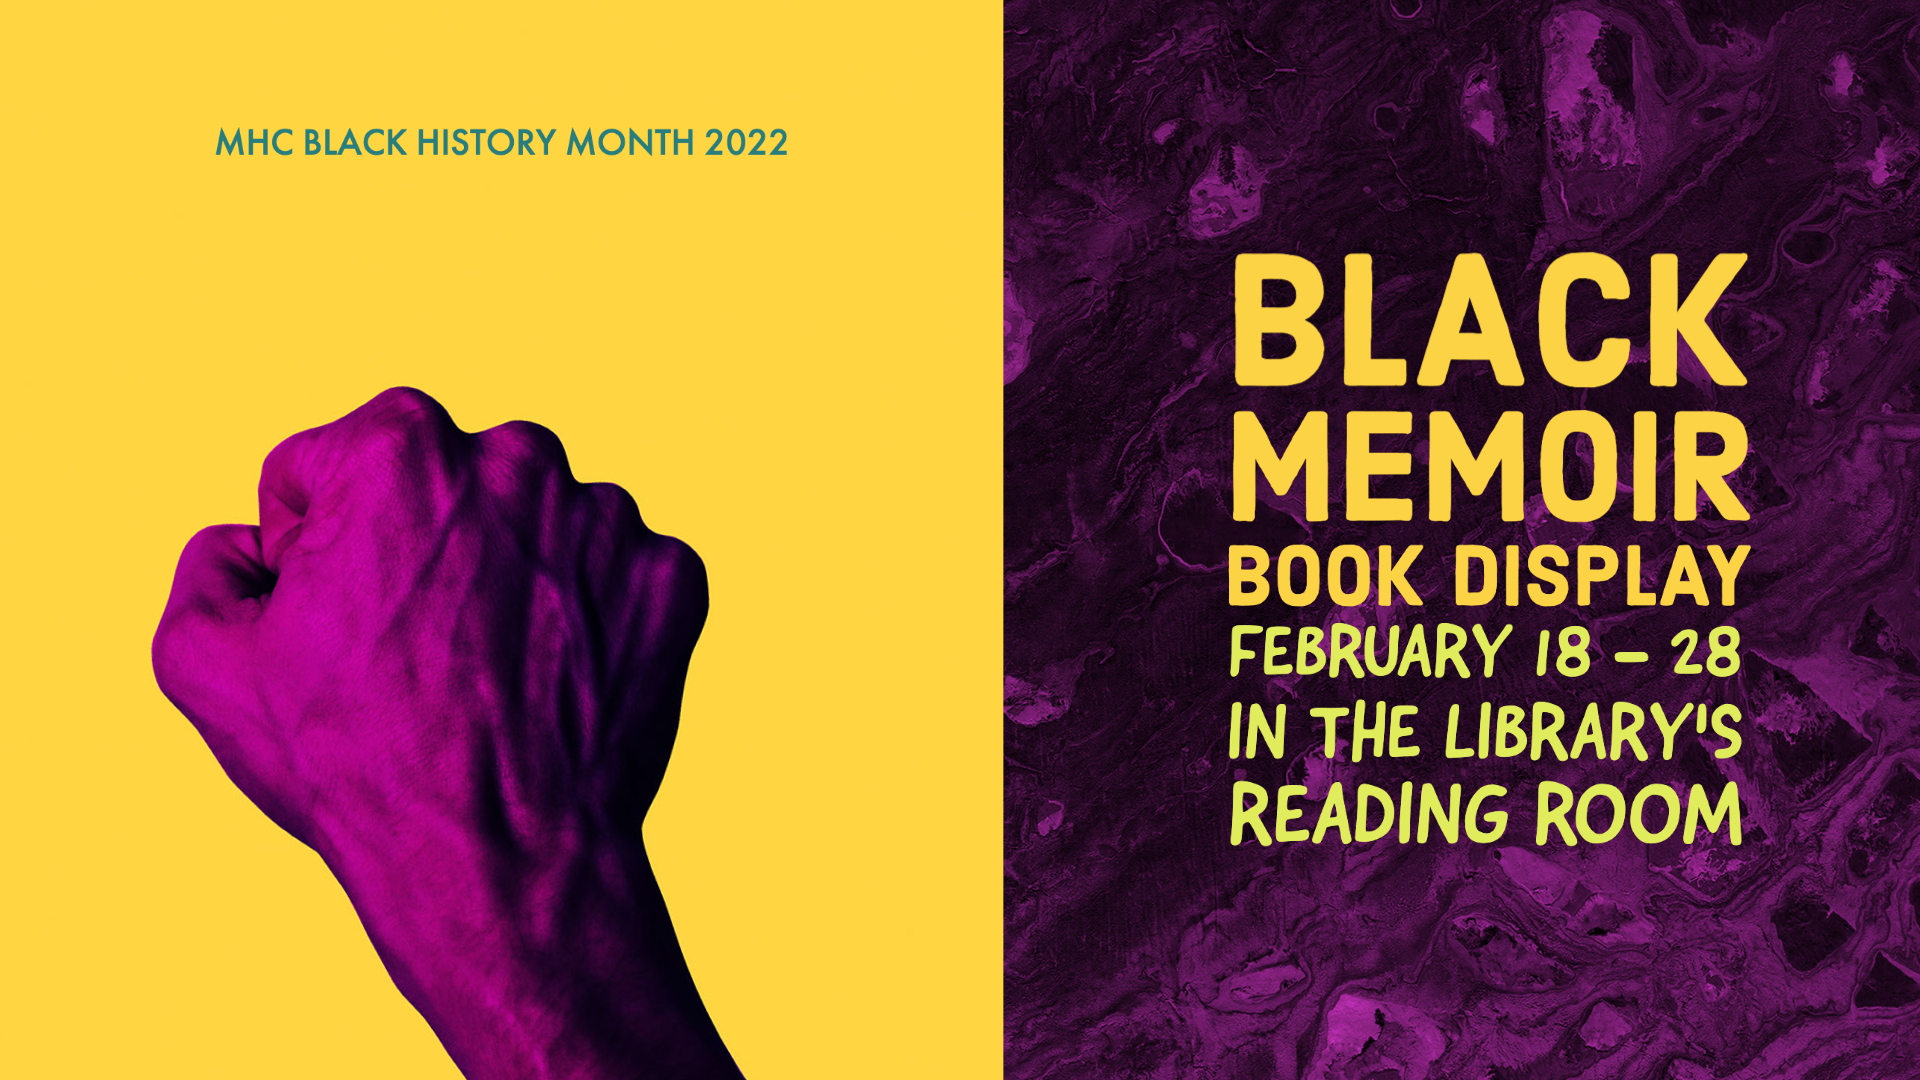 A raised fist and text that reads Black Memoir book display, February 18-28, in the Library's Reading Room